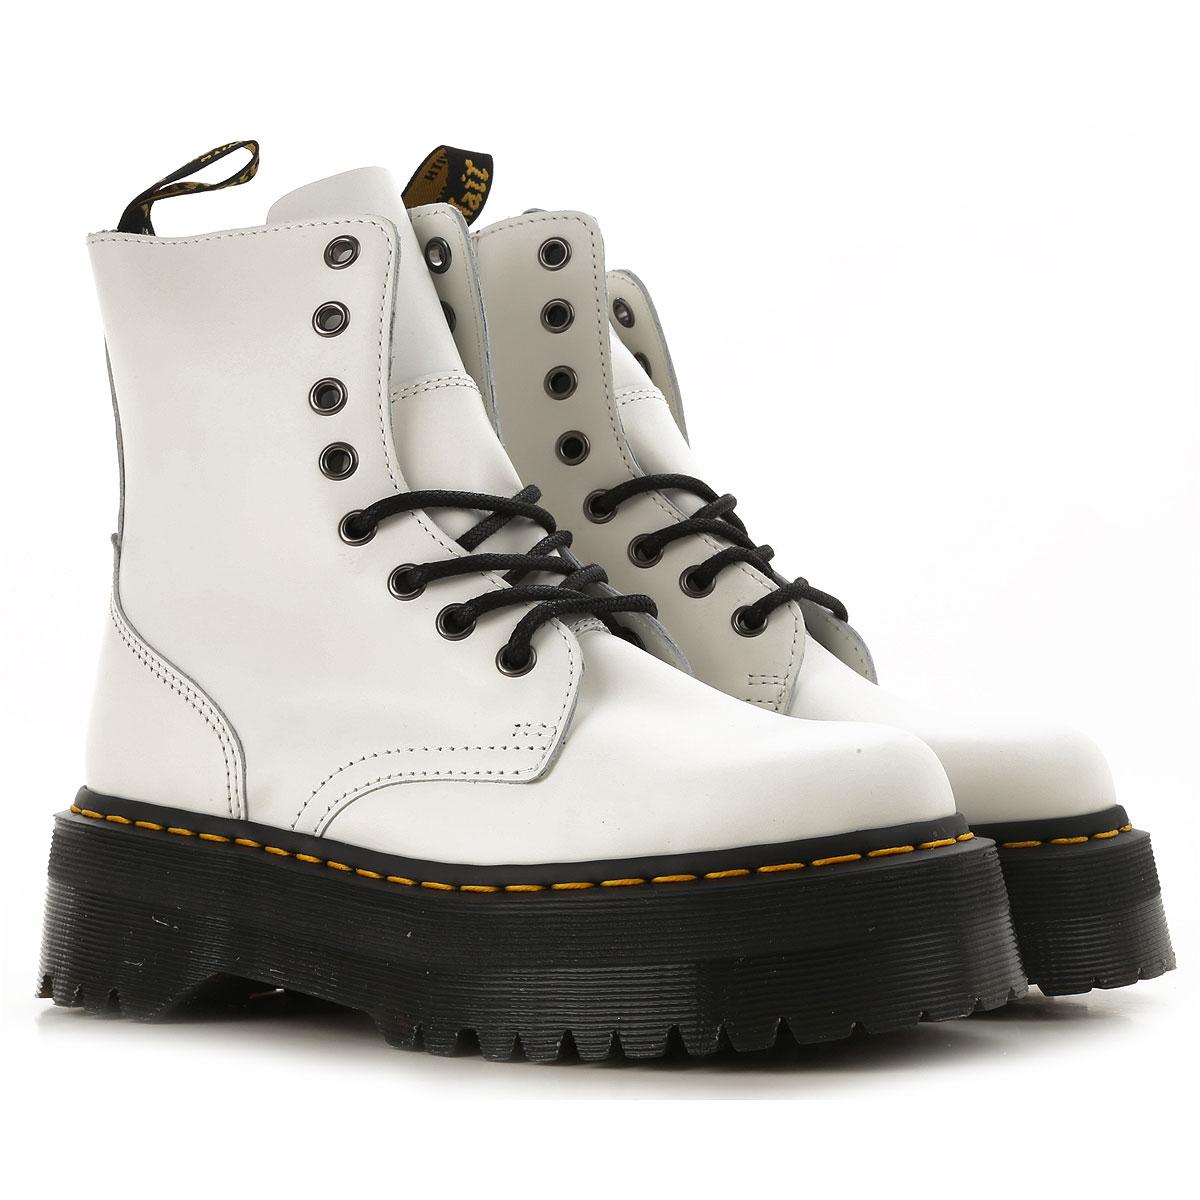 Lyst - Dr. Martens Boots For Women in White